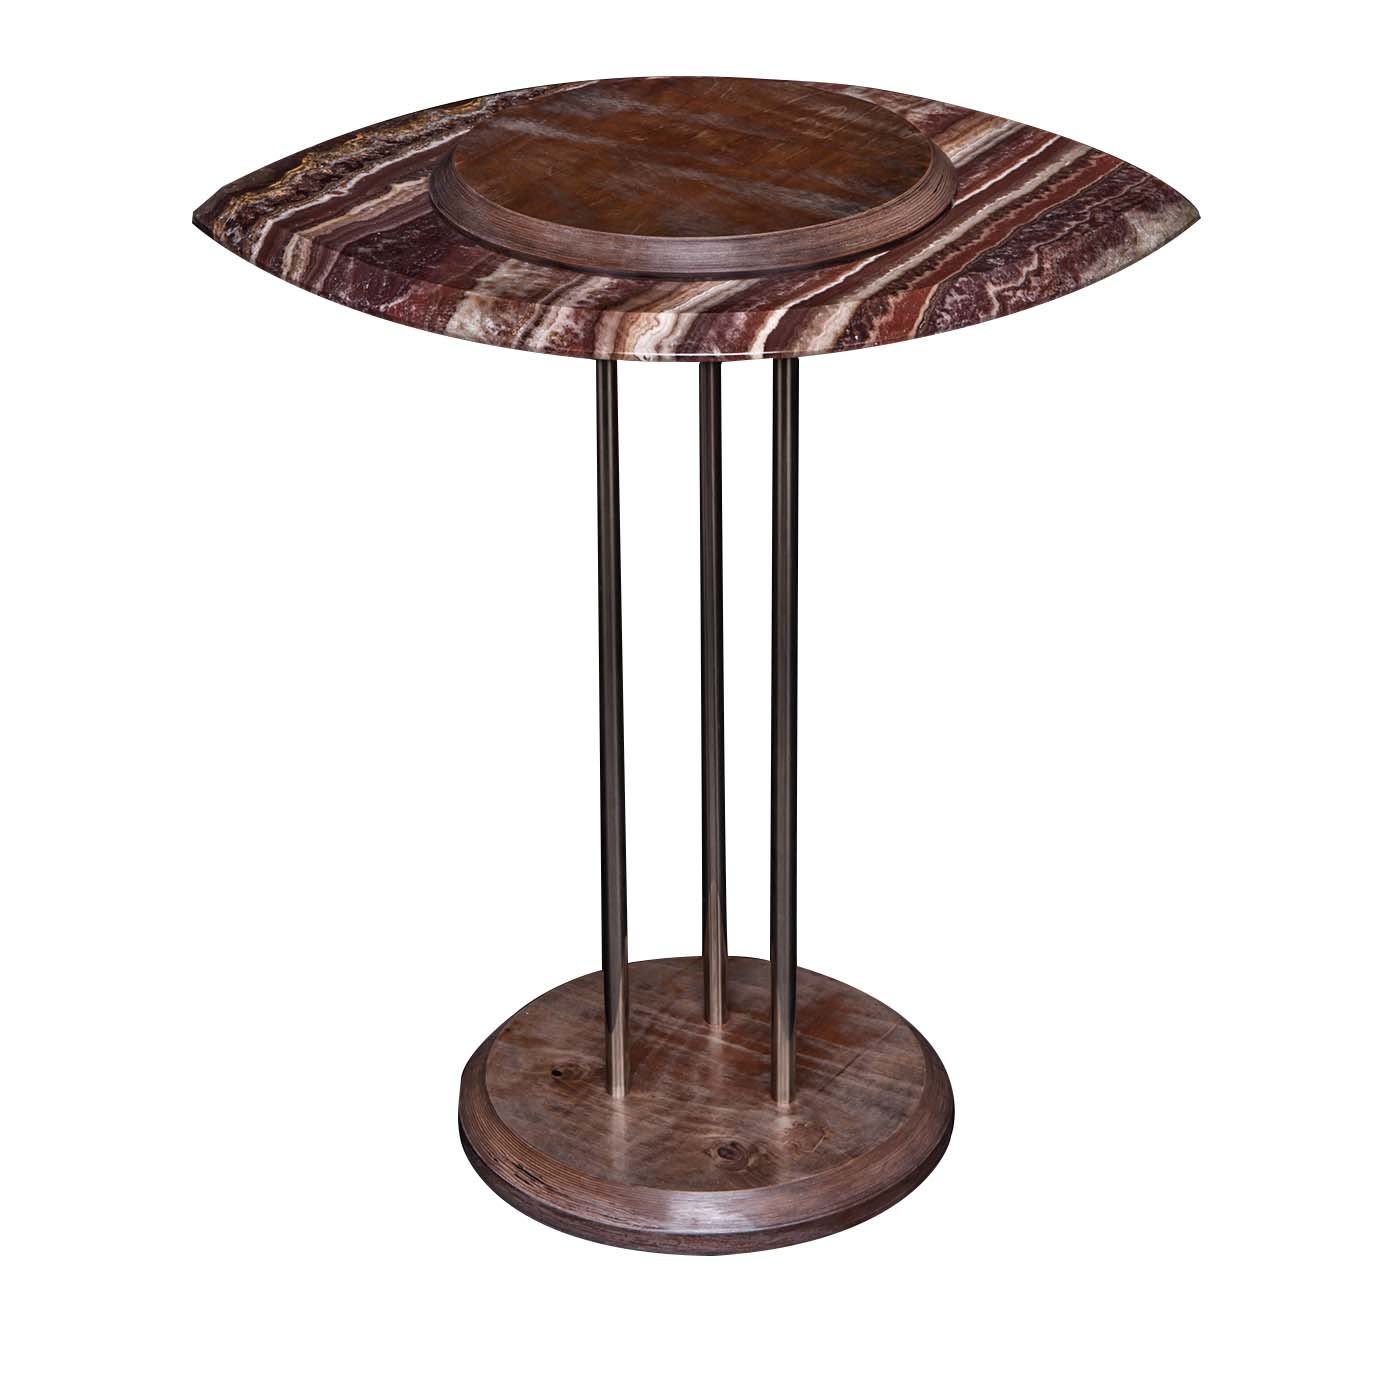 The Eye Side Table in Bombay Brown Onyx - Ateena